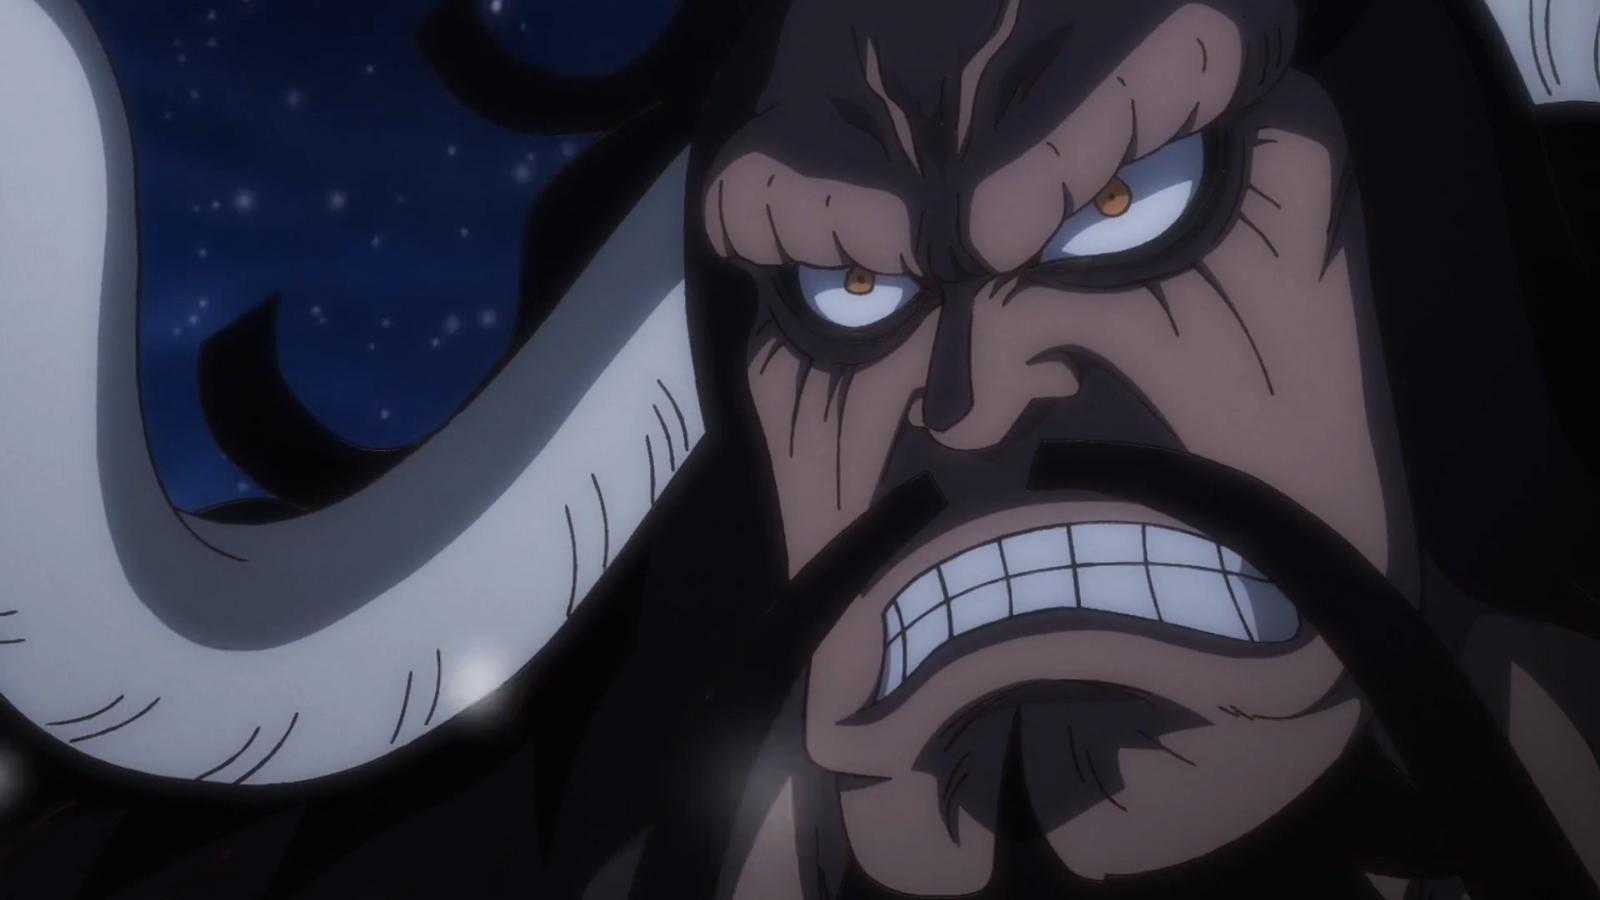 Kaido in the Wano arc of One Piece Episode 1007.